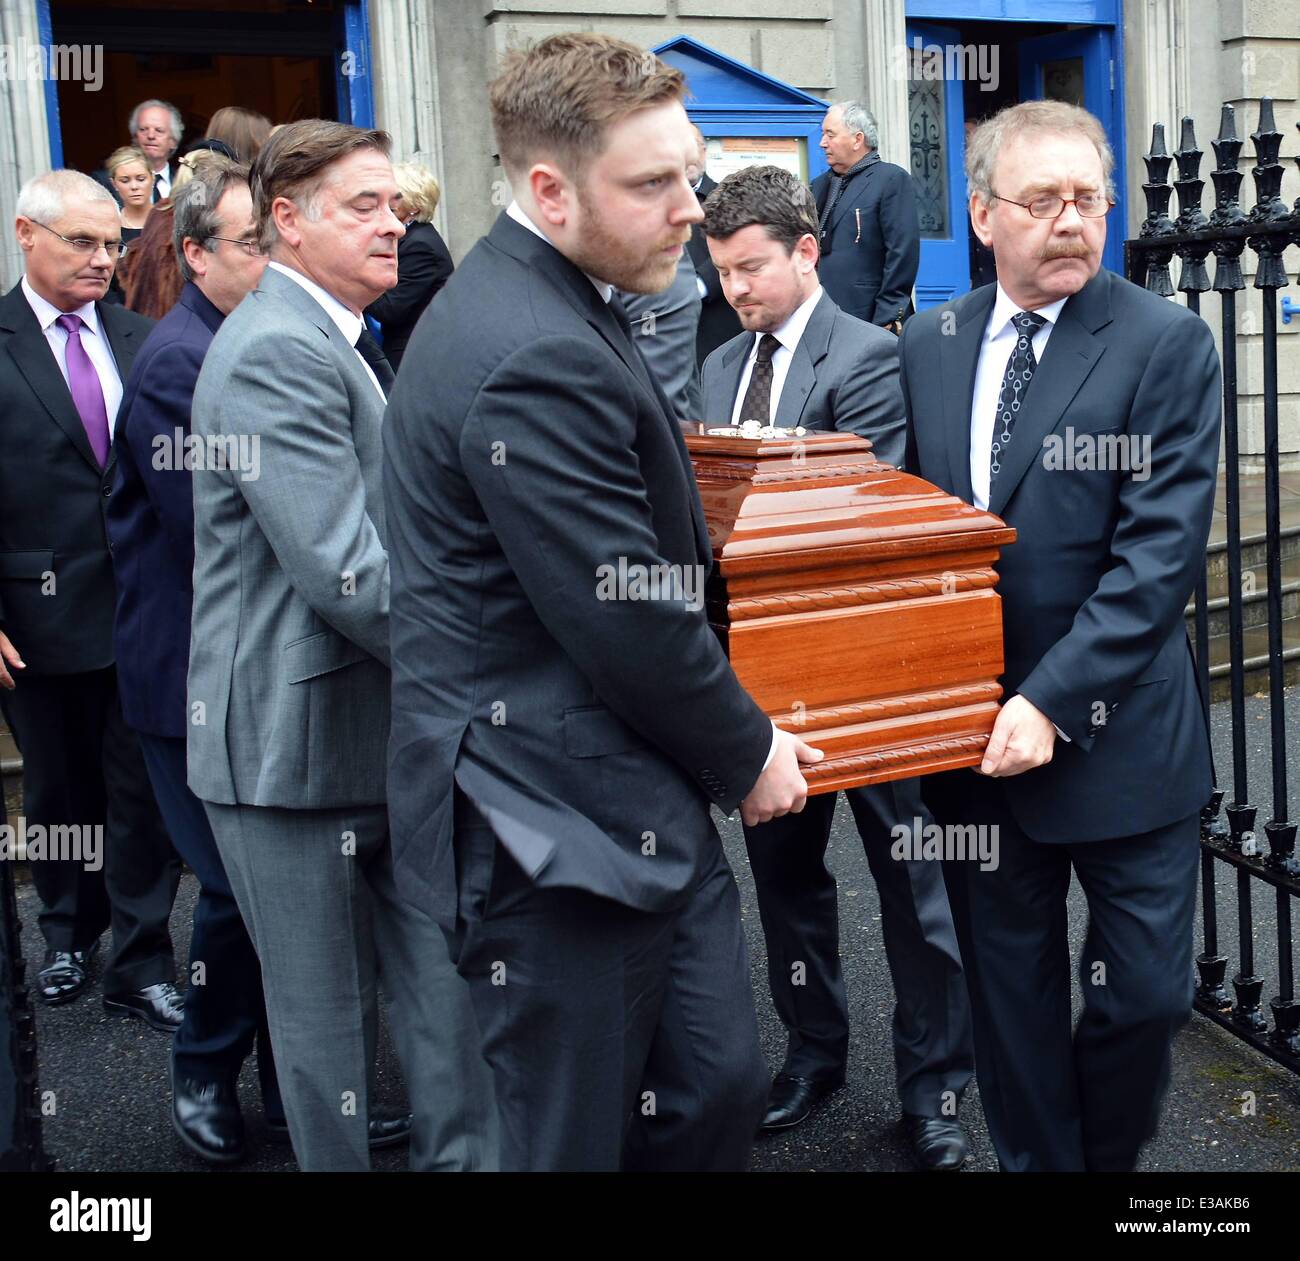 The Funeral of actress Susan Fitzgerald at The Church of The Three Patrons, Rathgar  Featuring: Michael Colgan & Coffin Bearers carry Susan Fitzgerlad's remains Where: Dublin, Ireland When: 11 Sep 2013 Stock Photo